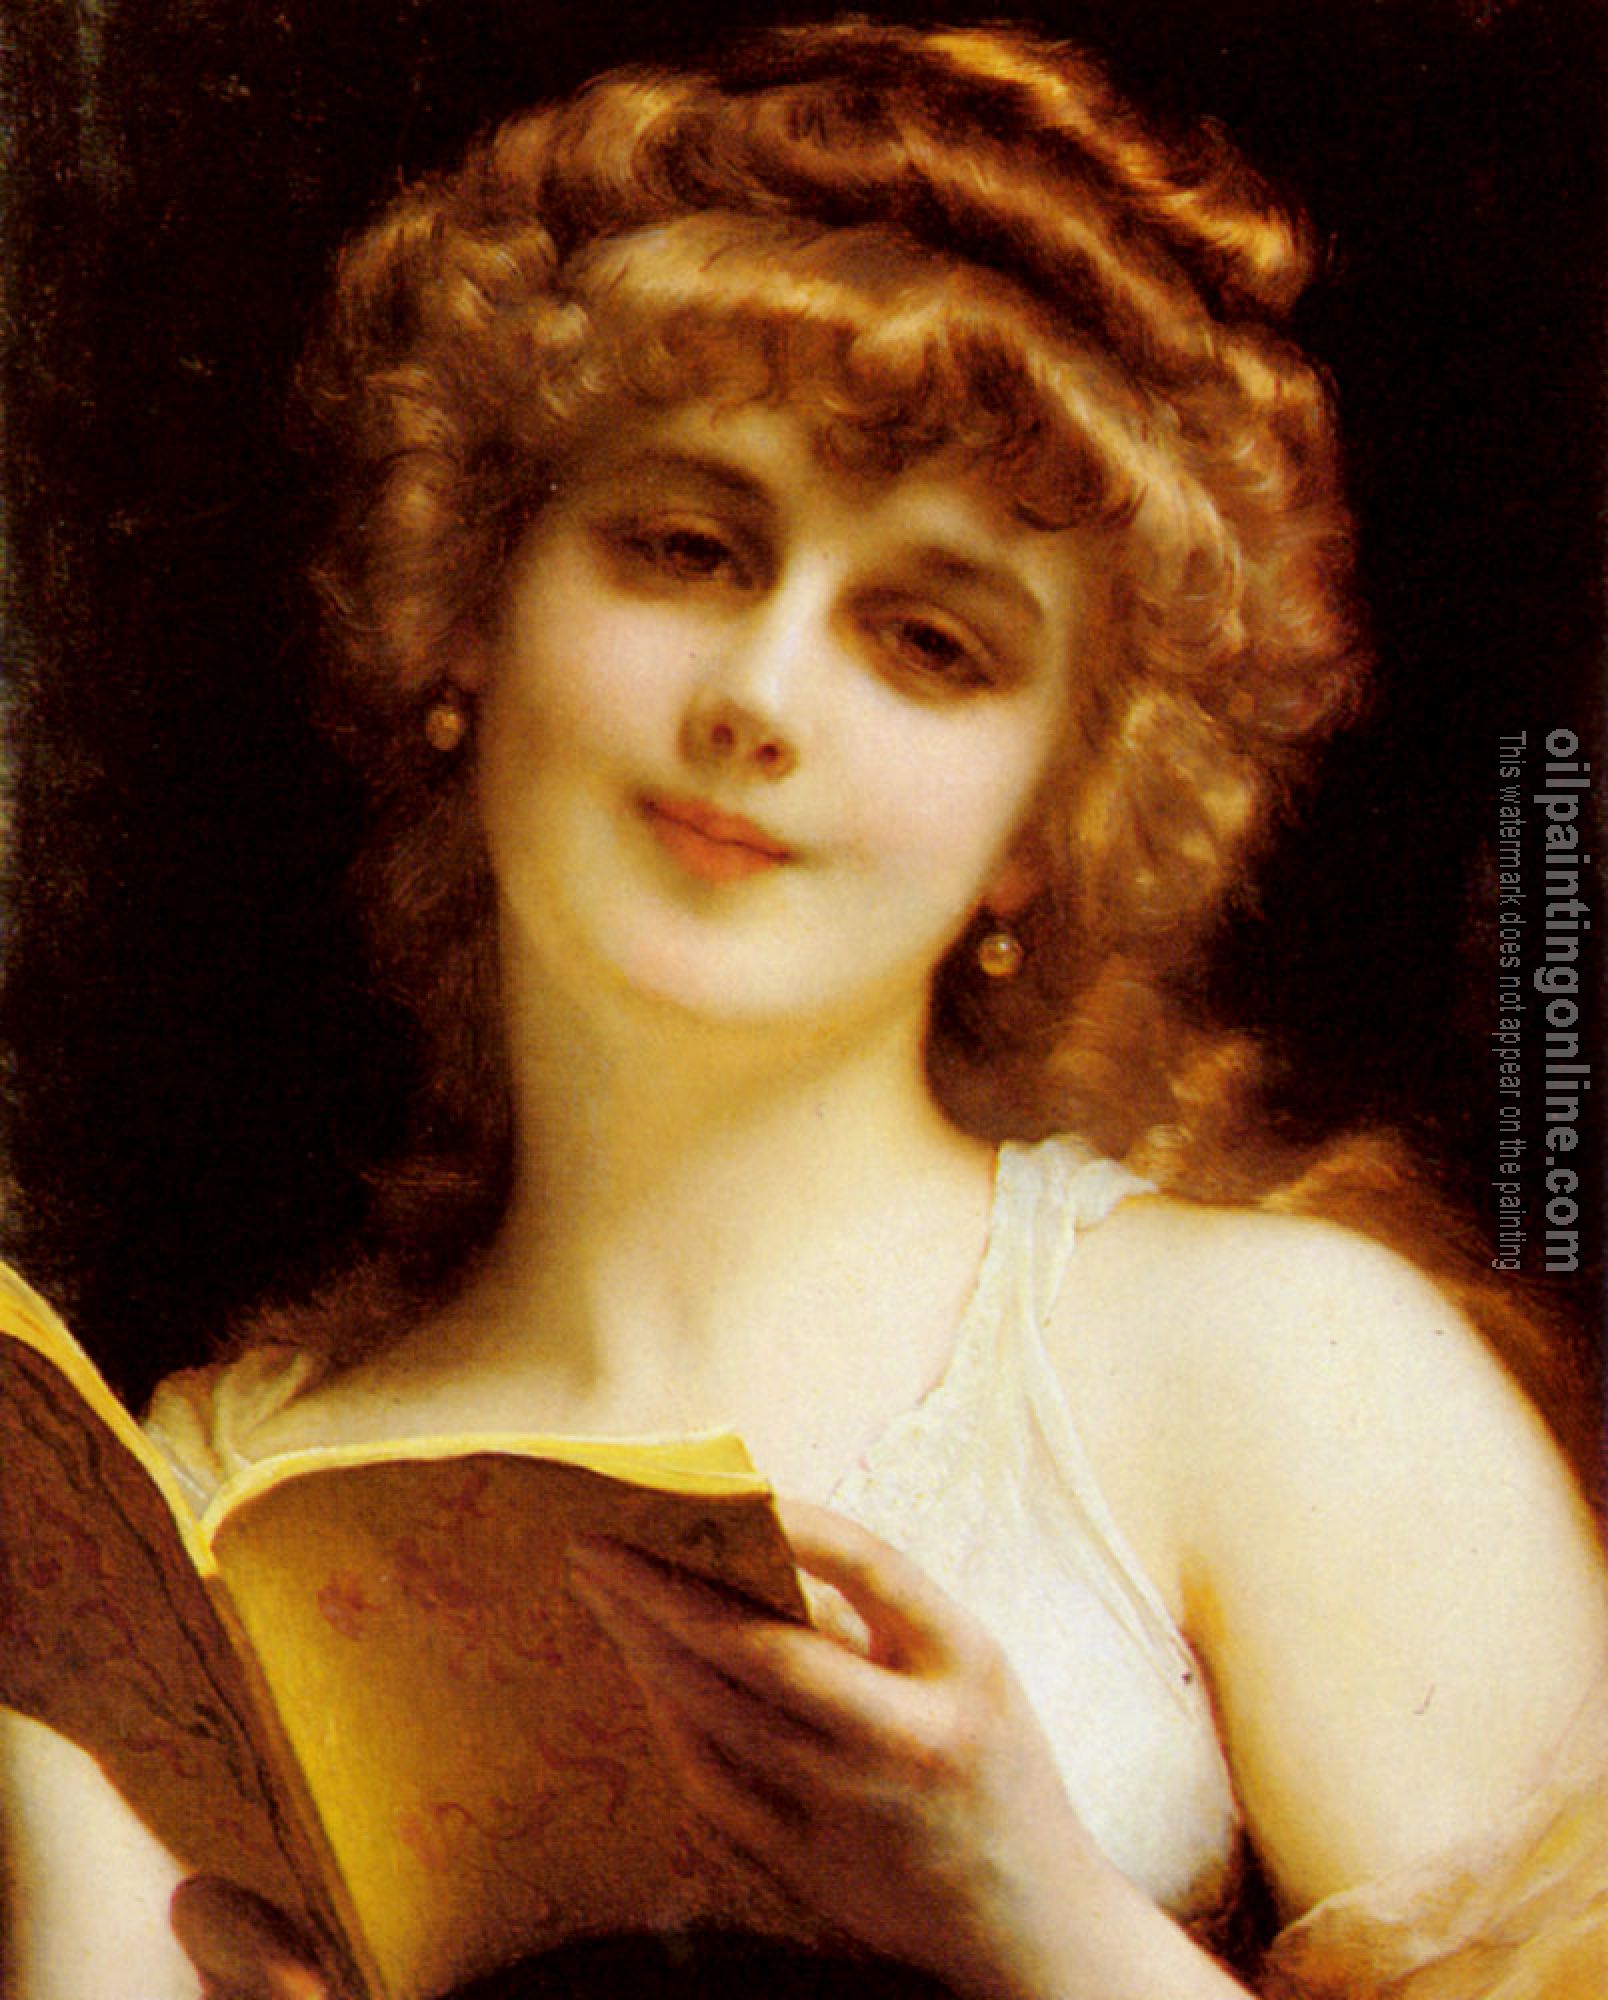 Piot, Etienne Adolphe - A Blonde Beauty Holding a Book